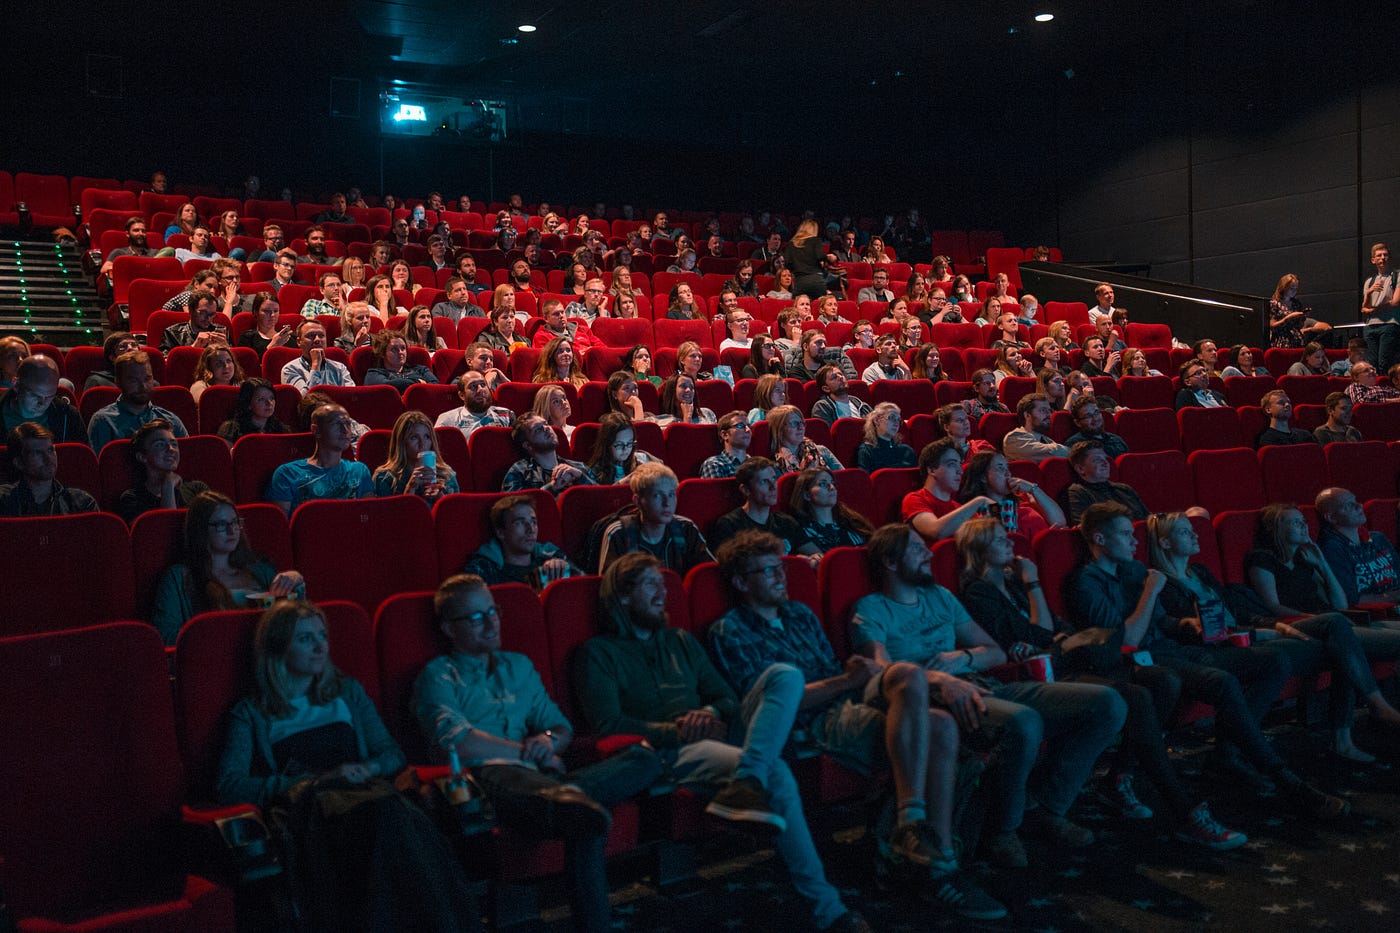 A captivated audience seated in a dimly lit theater with red chairs, watching intently.